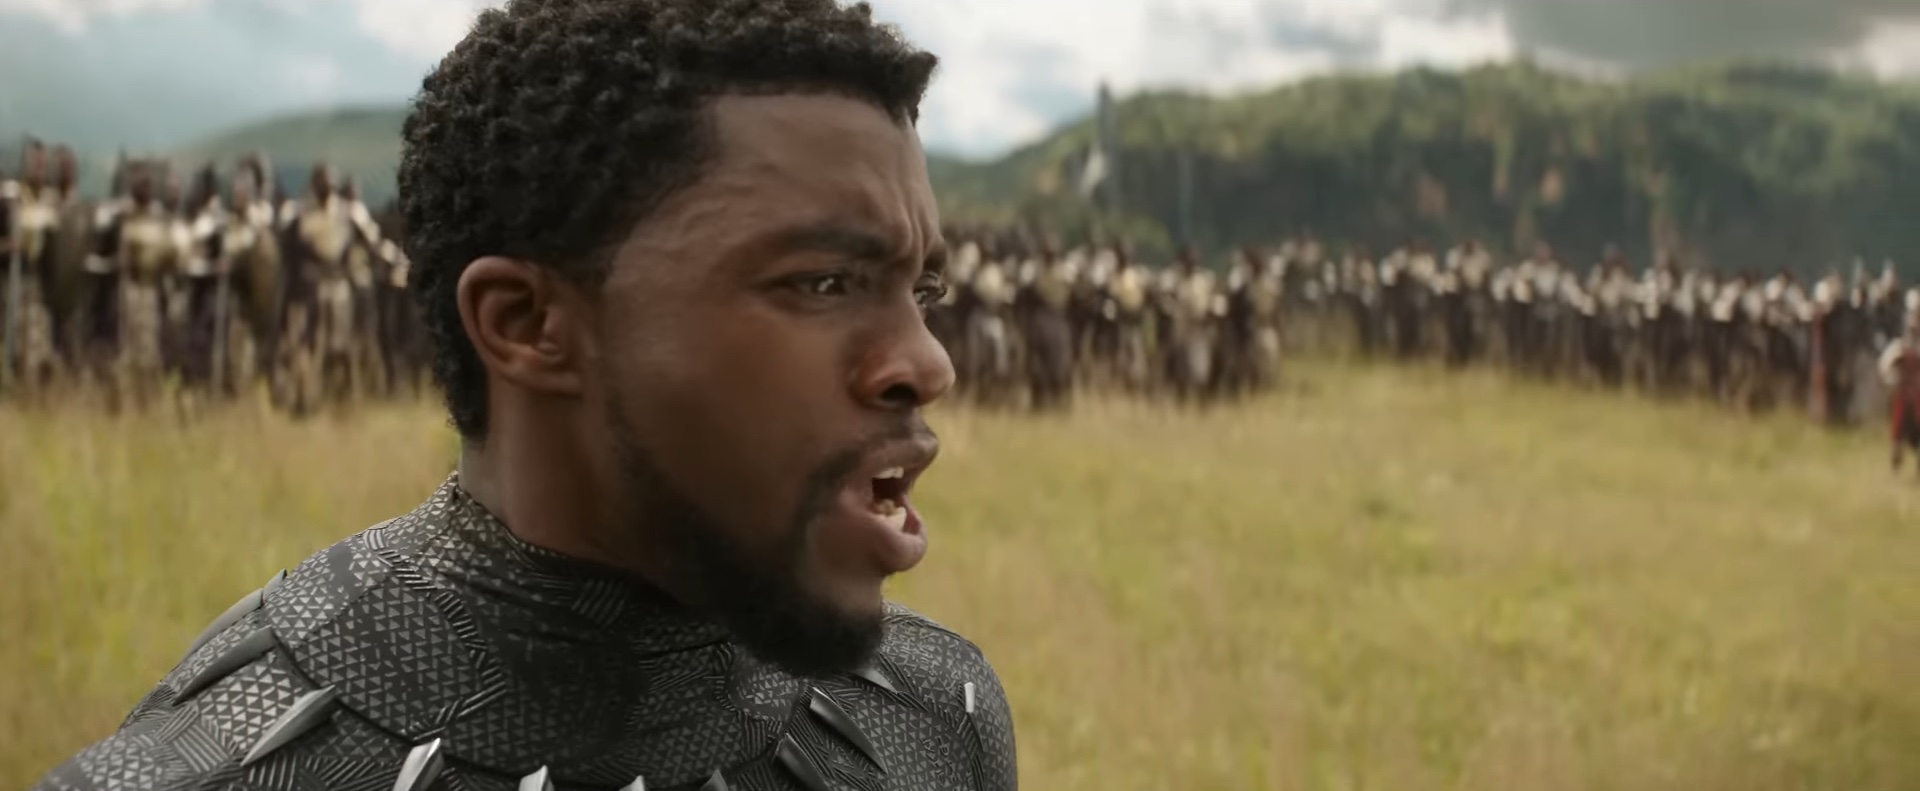 What Does M'Baku's Chant Mean in Black Panther?